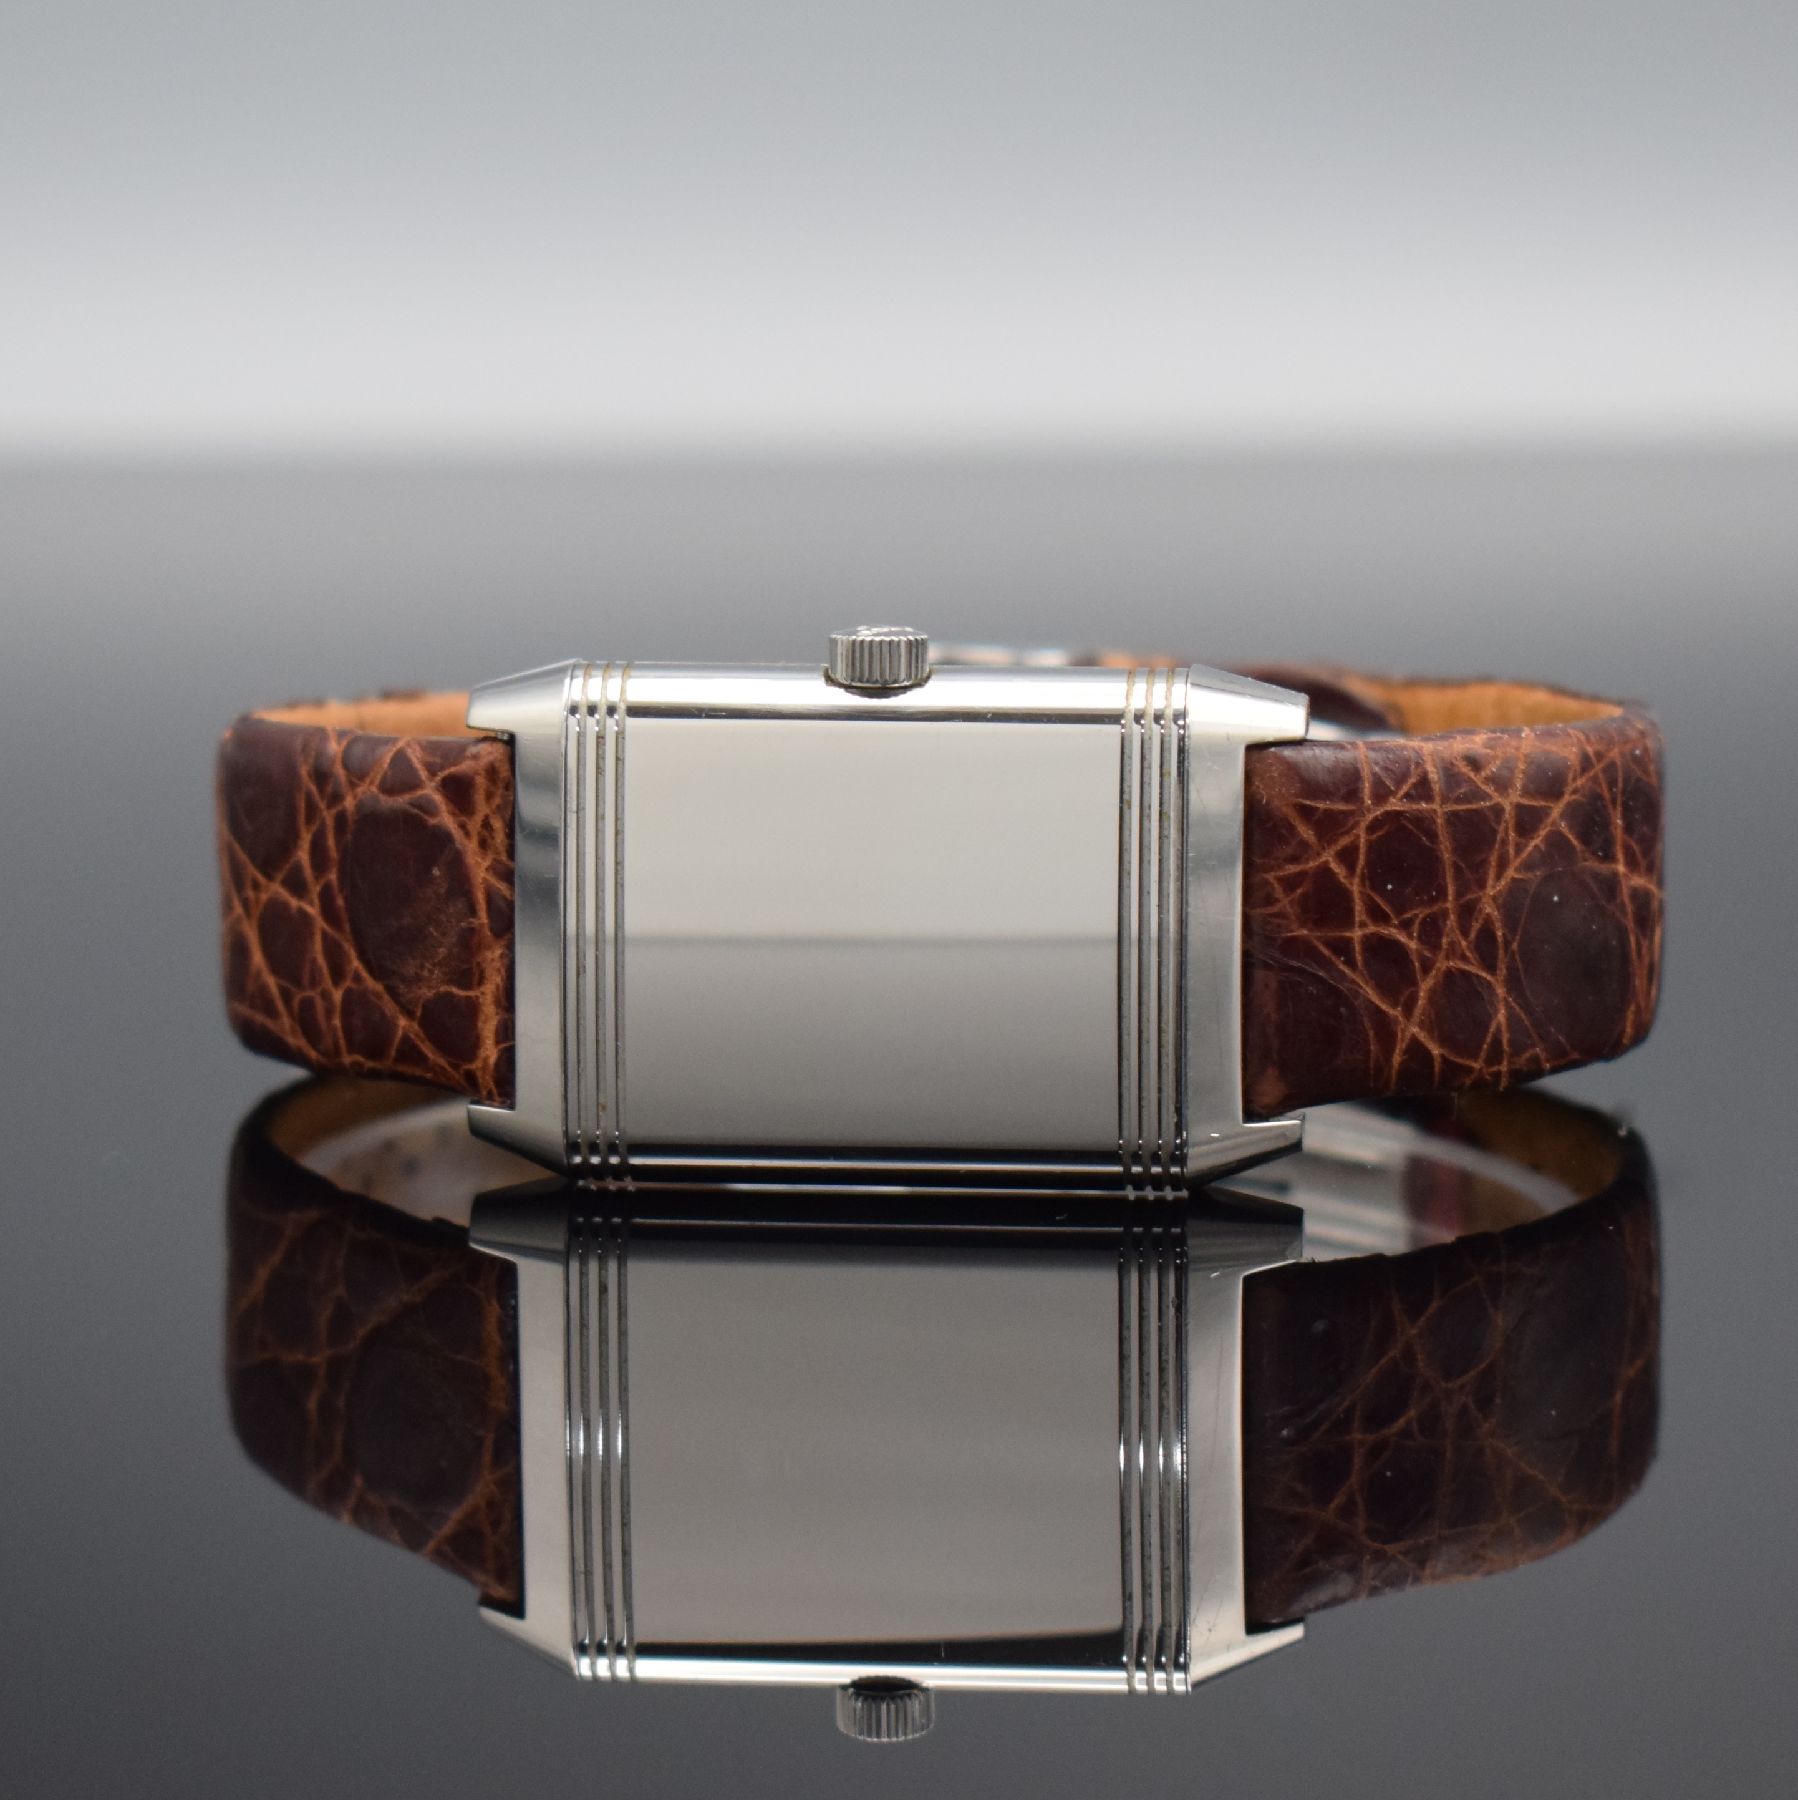 Jaeger-LeCoultre Reverso Grand Taille Armbanduhr in Stahl, - Image 3 of 11